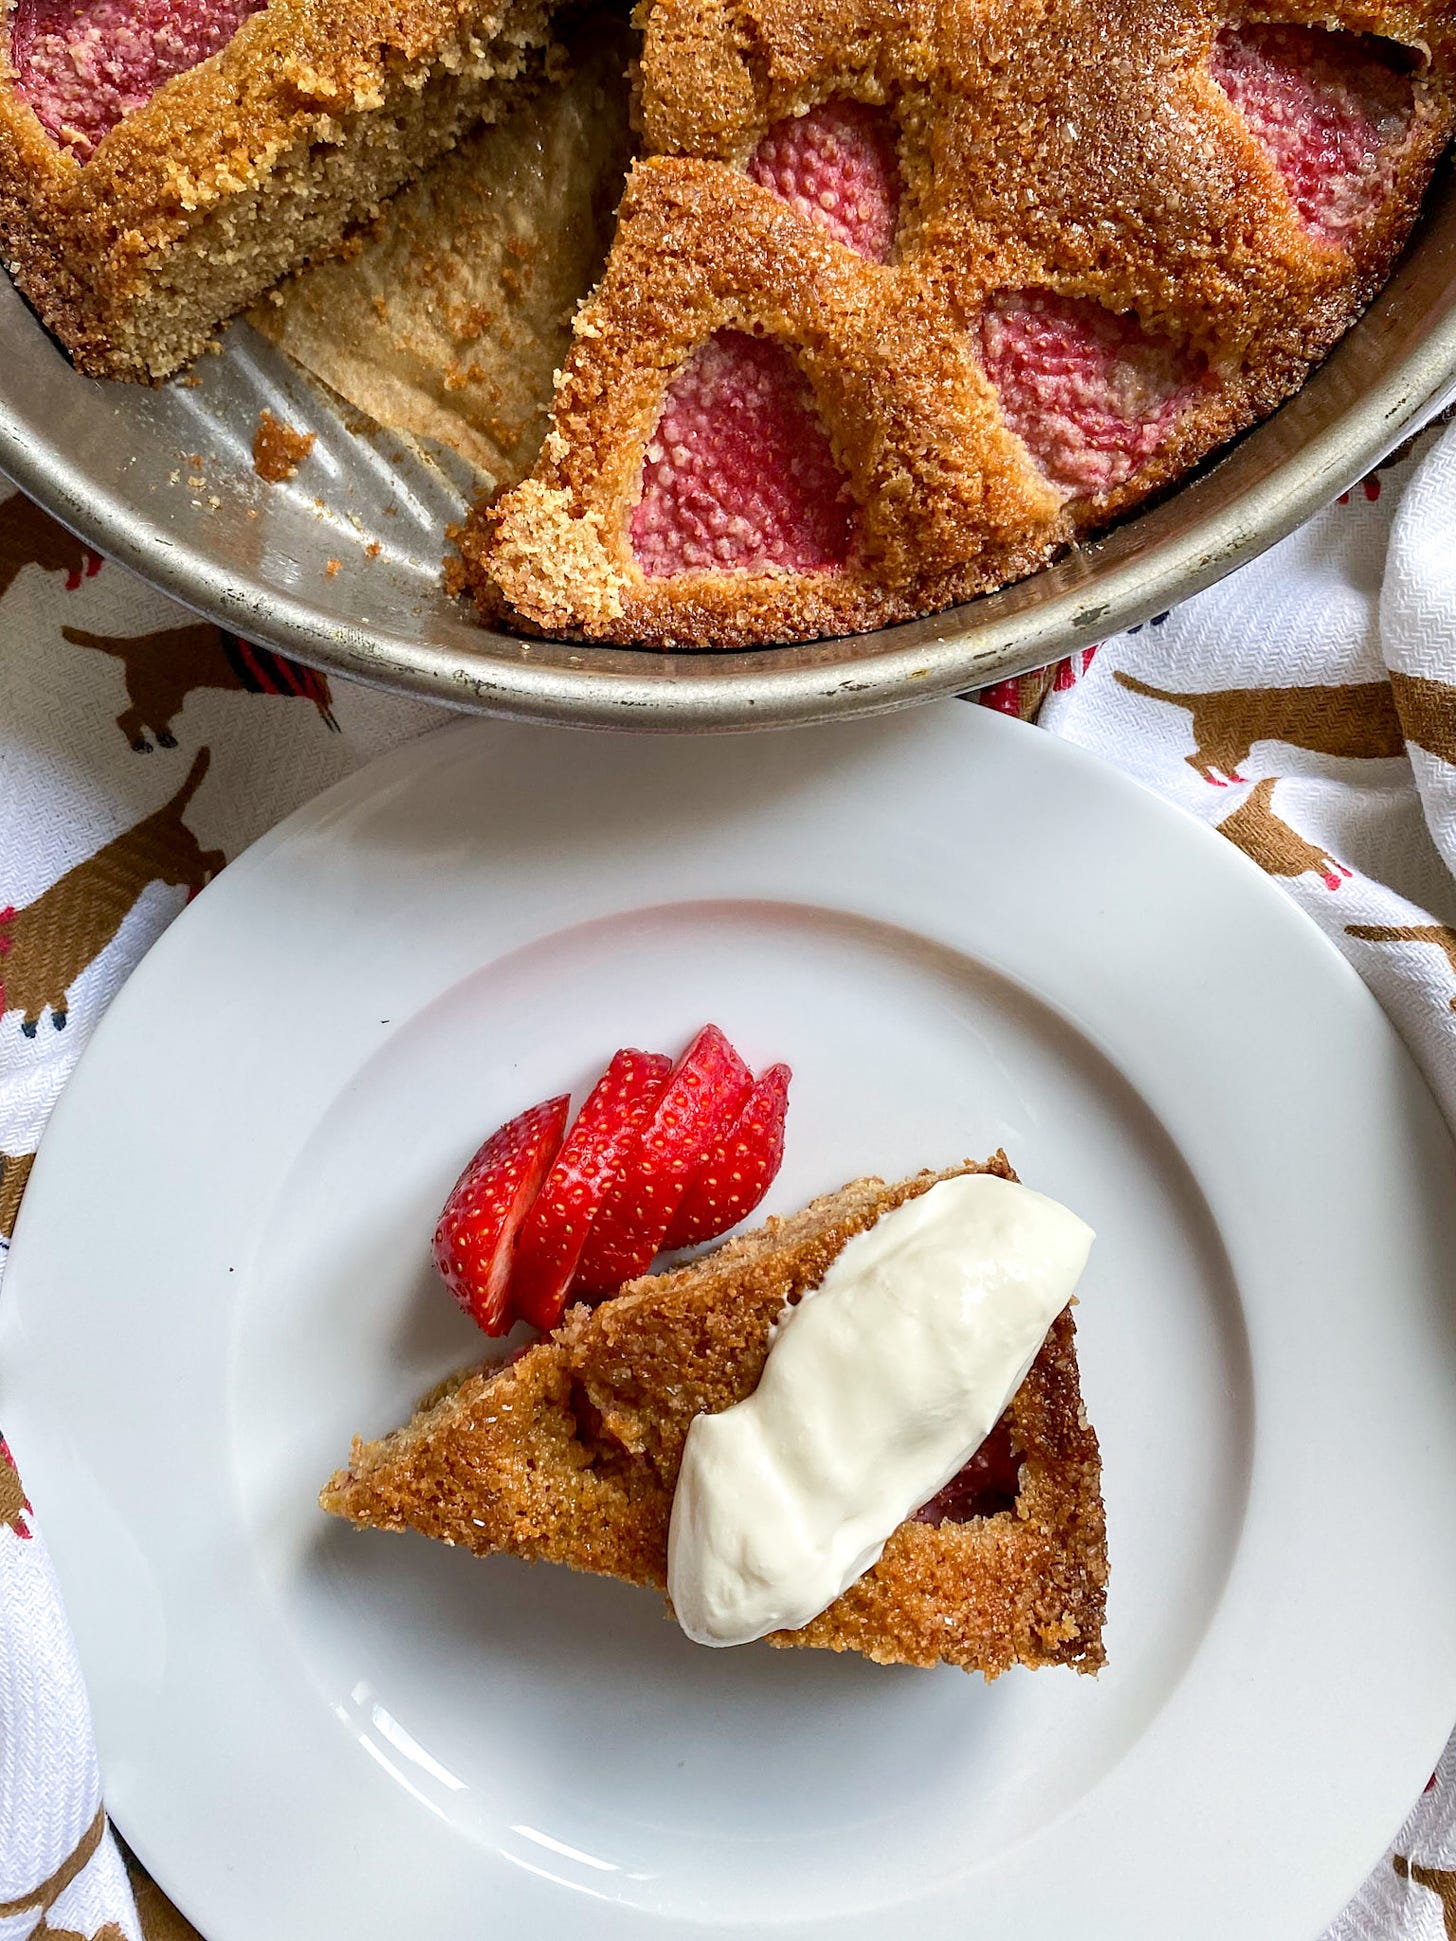 Strawberry spelt cake with a piece cut out on plate with sliced strawberries and cream